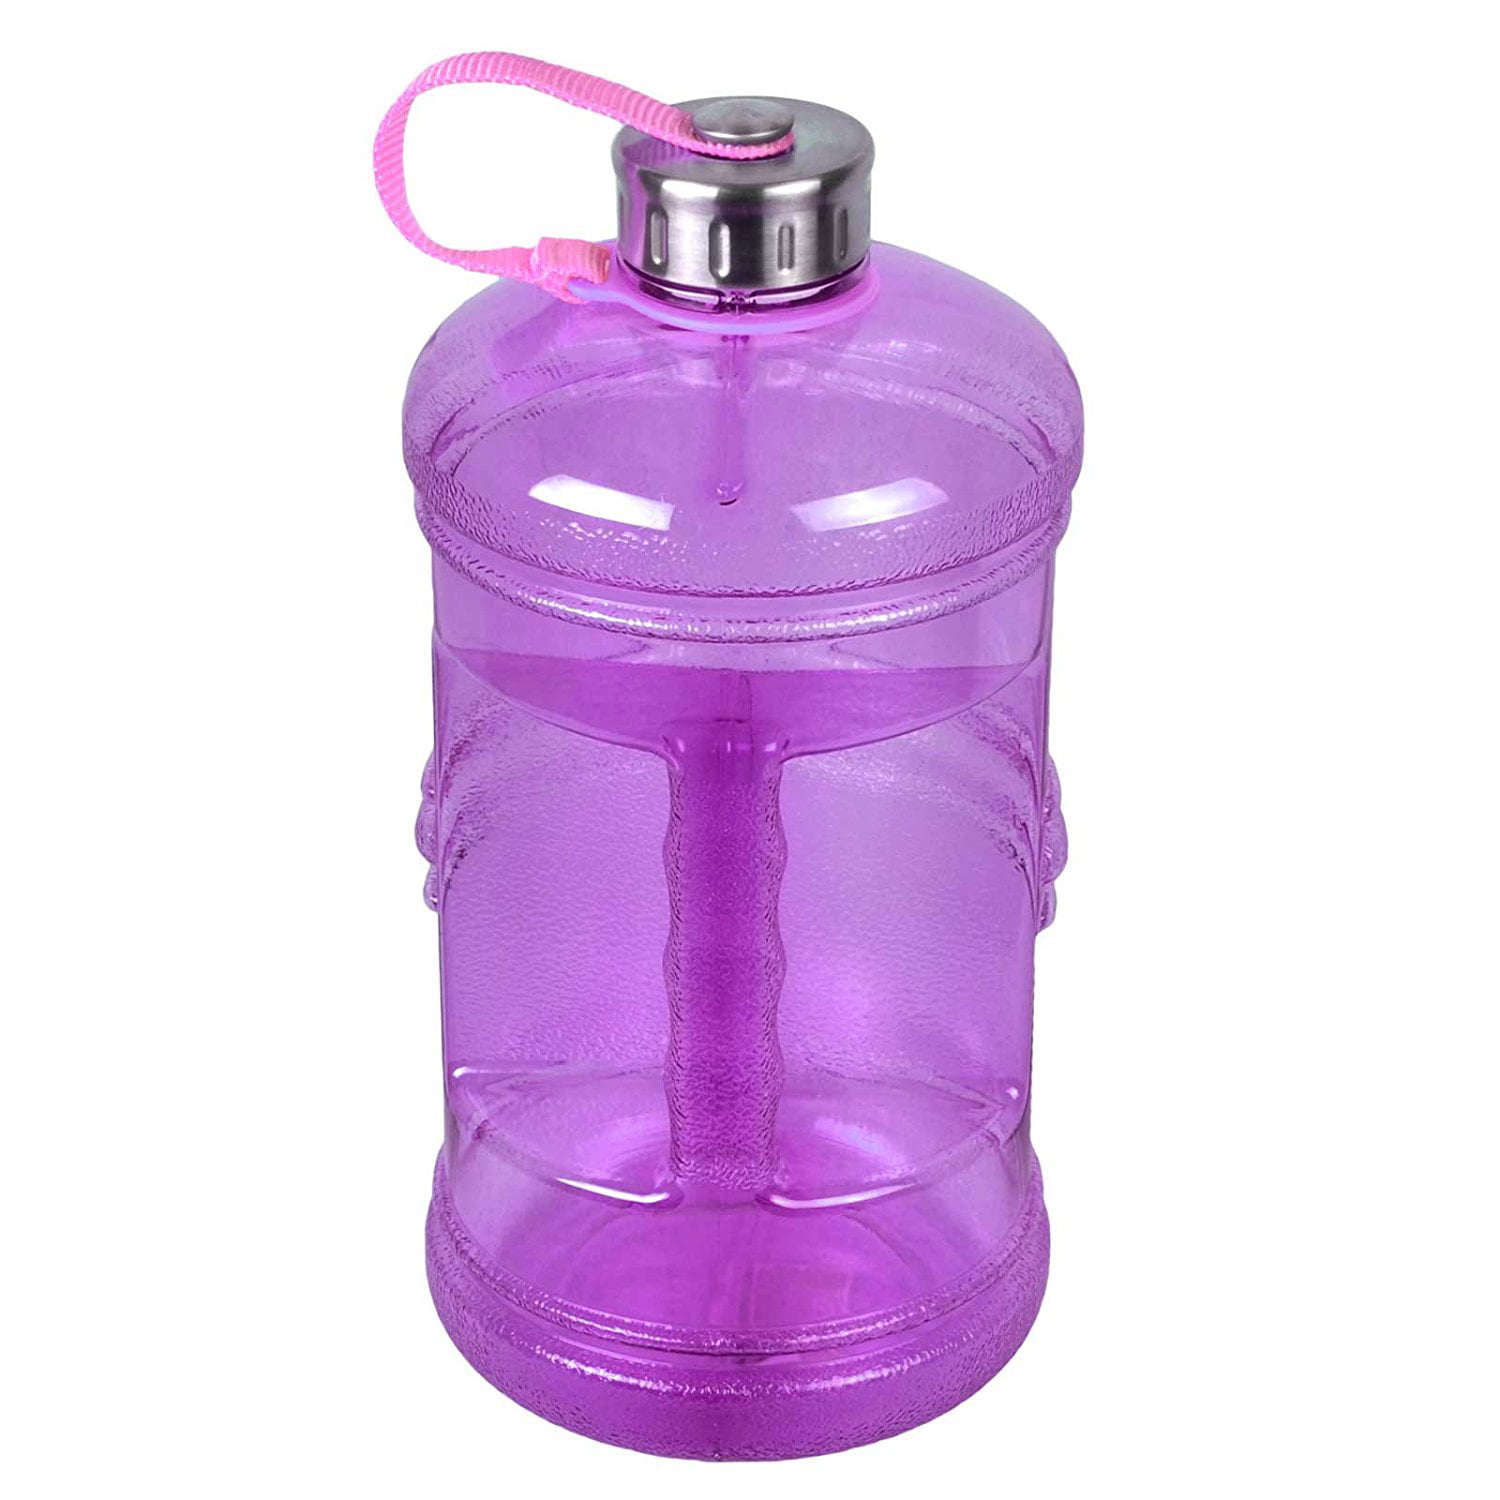 3 Liter Bpa Free Reusable Plastic Drinking Water Bottle Jug Container W